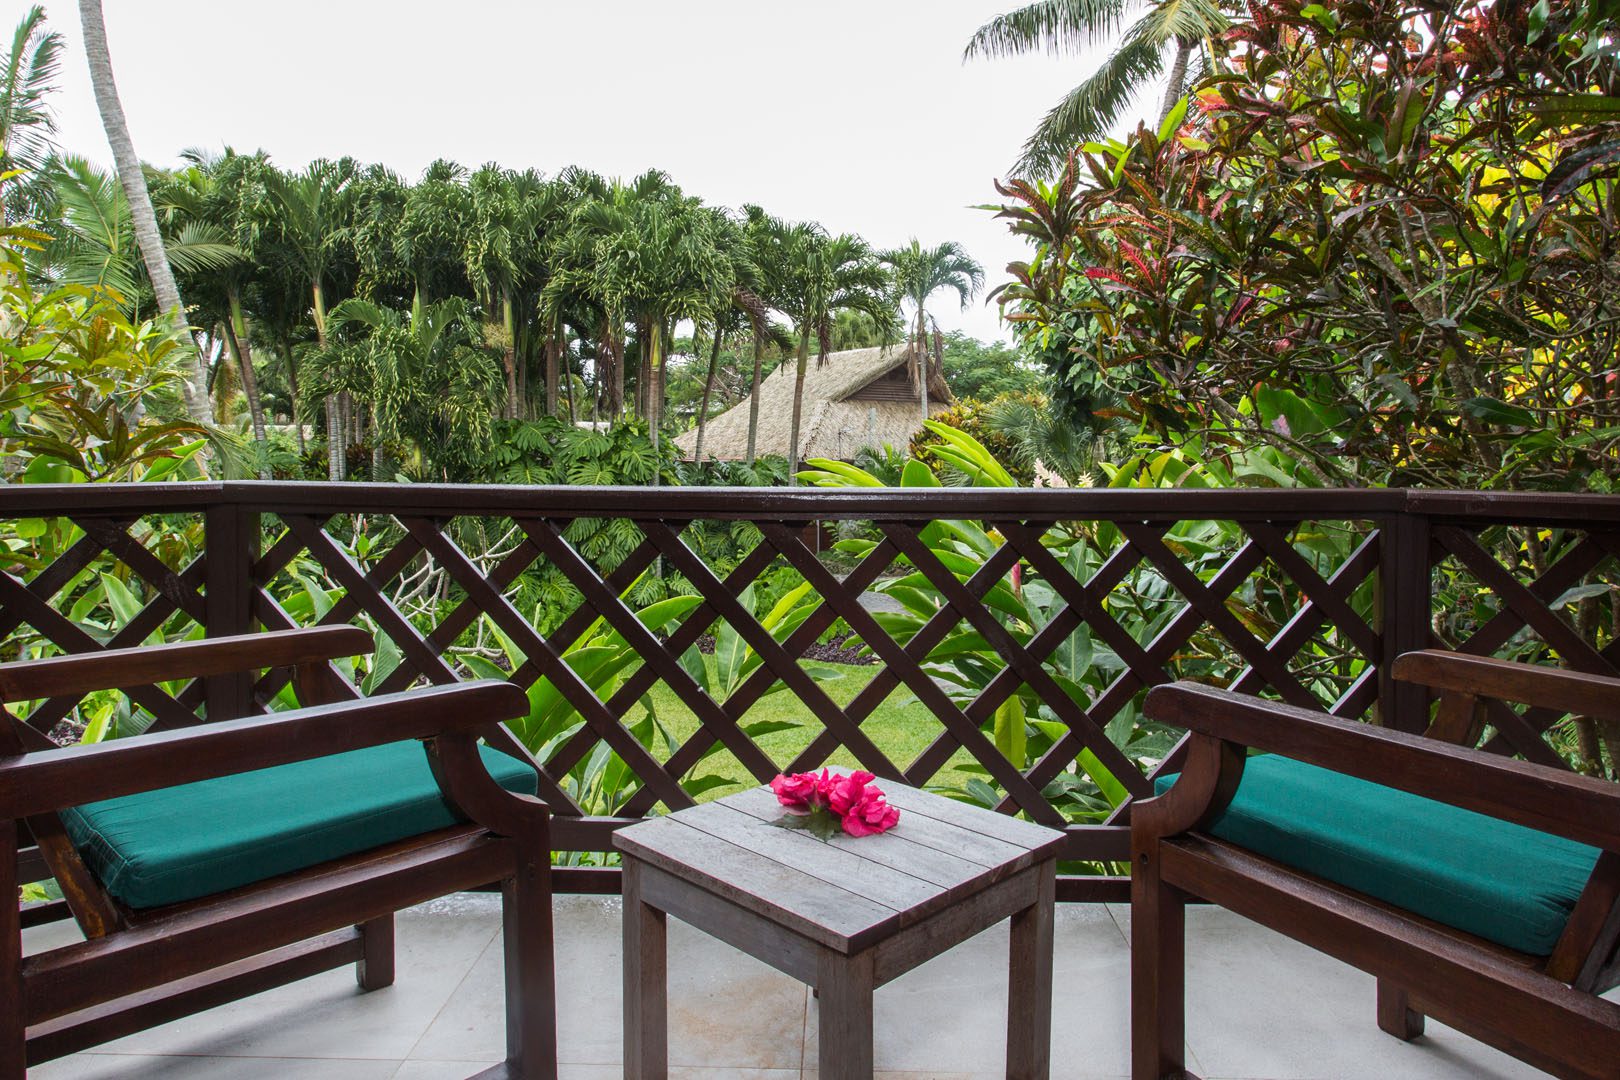 A beautiful view of the Resort garden from the Standard Studio private balcony